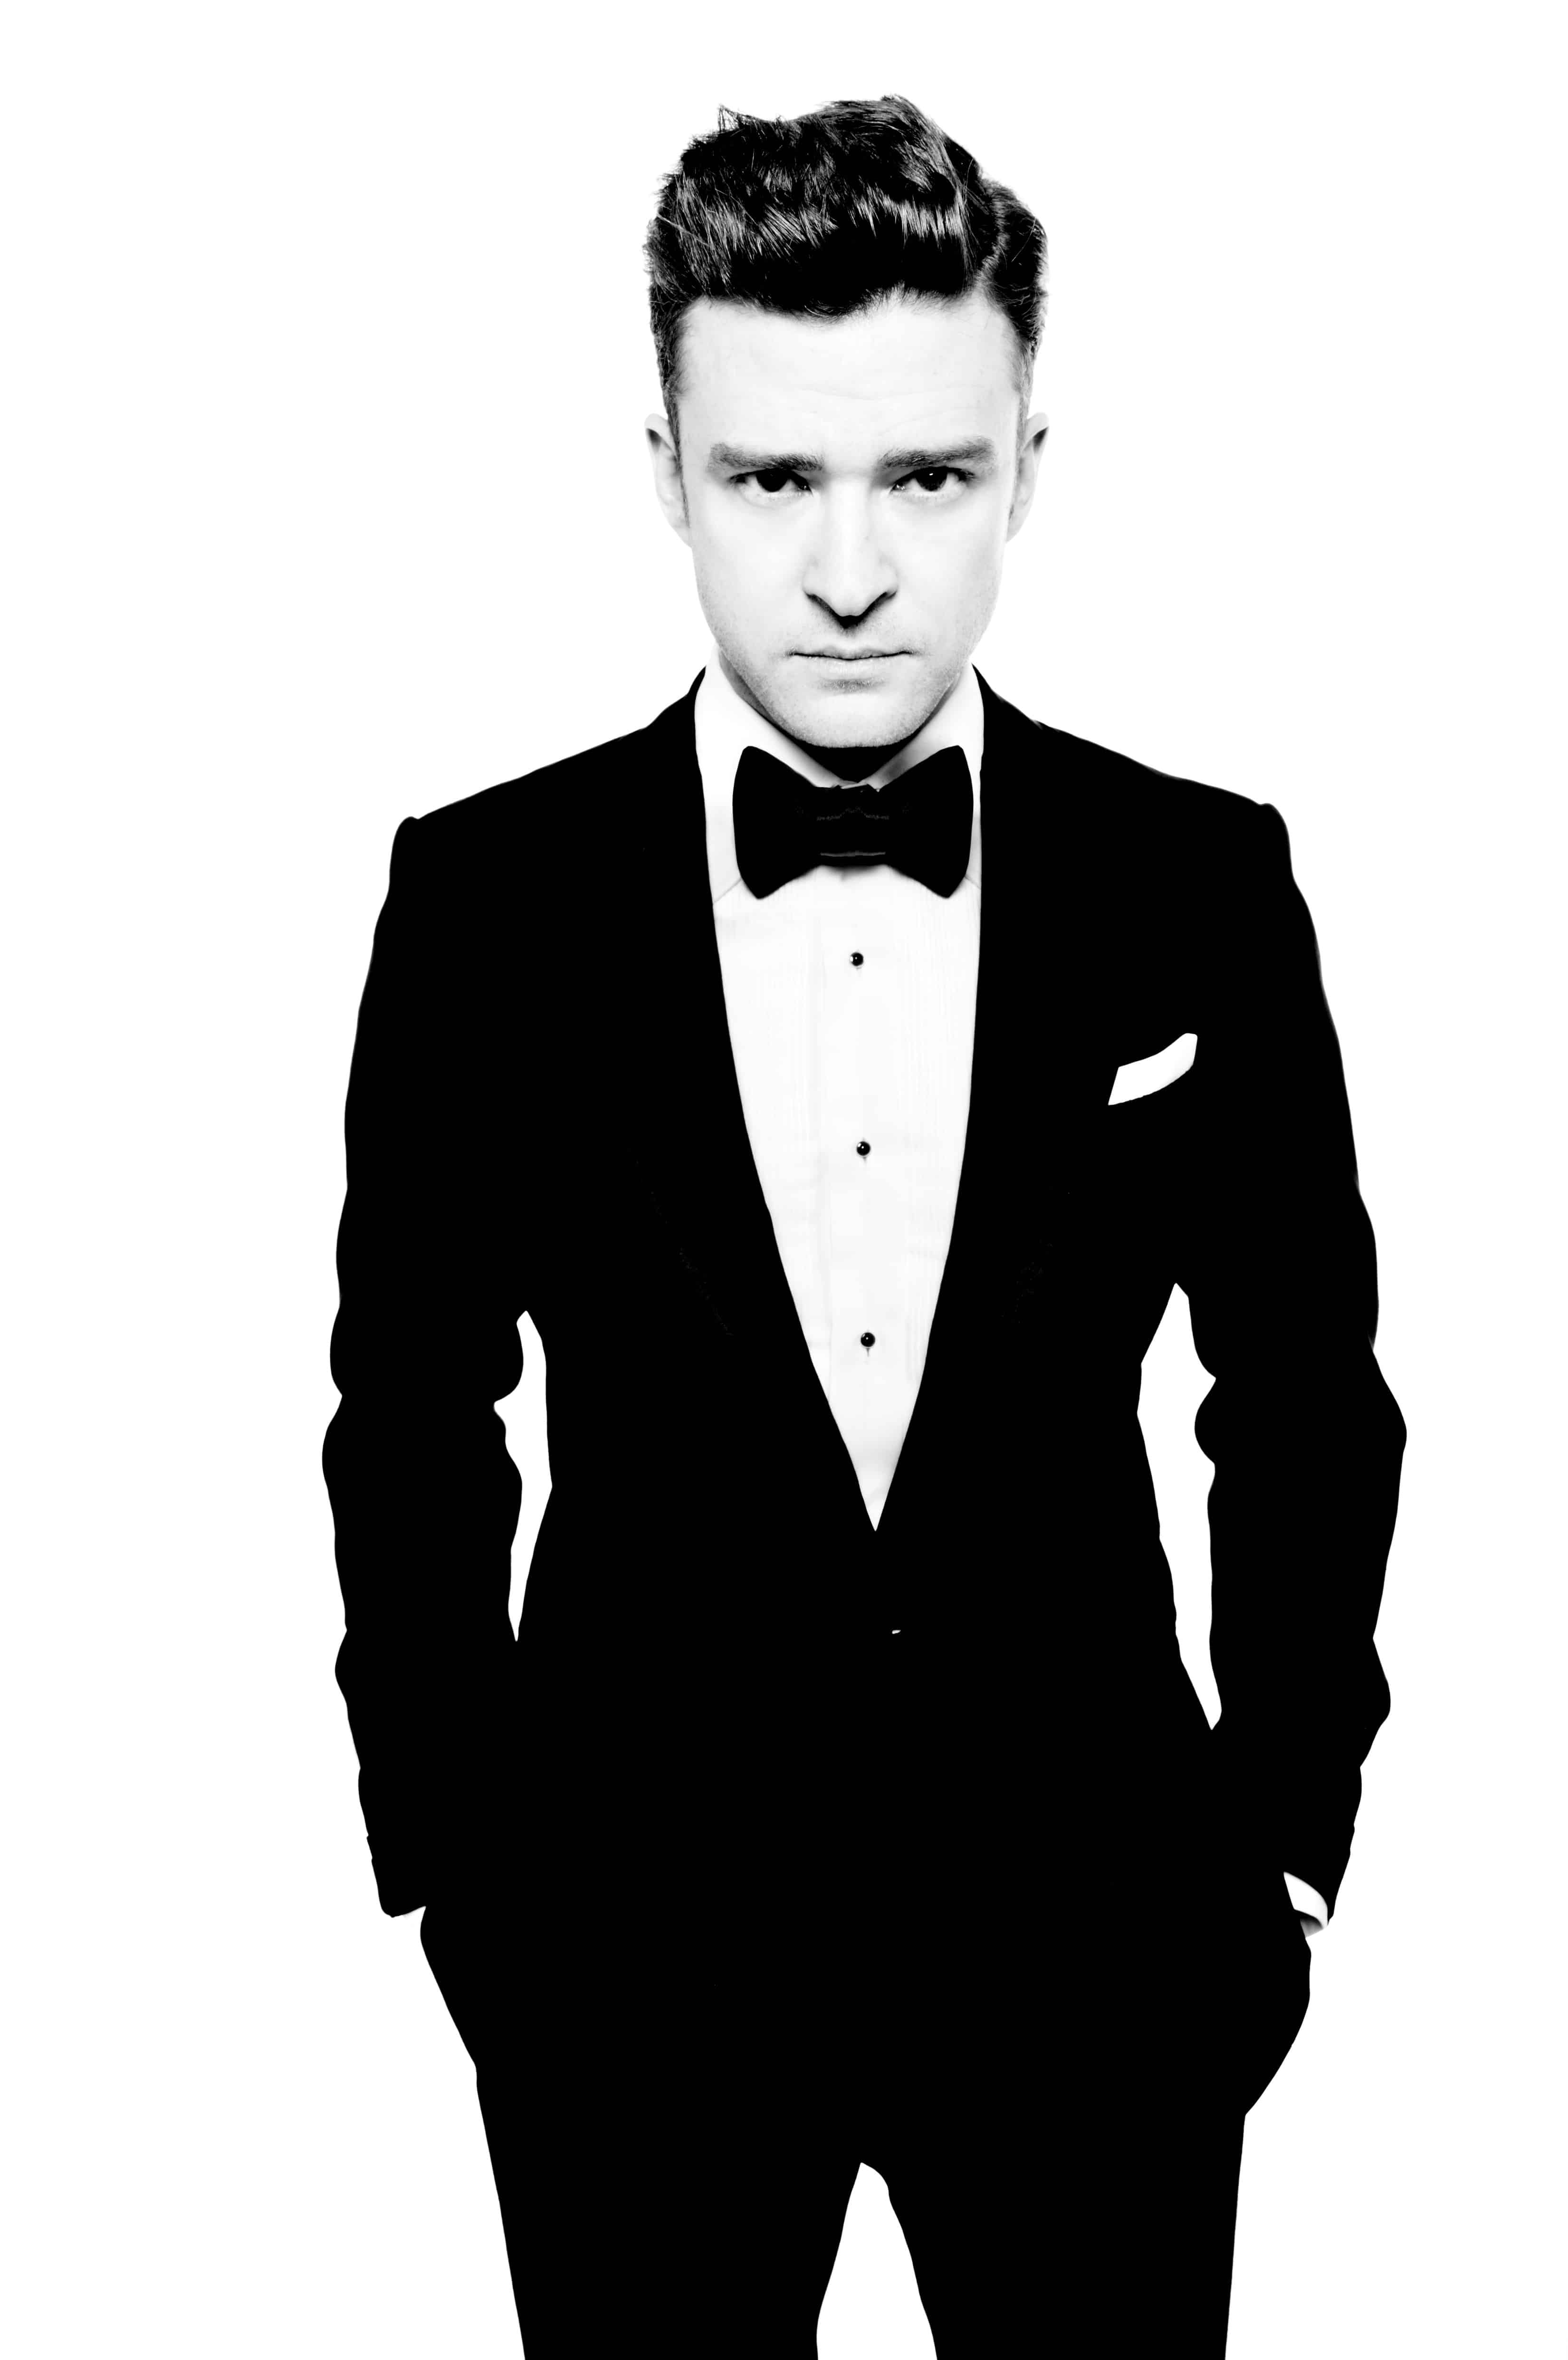 Justin Timberlake in a suit